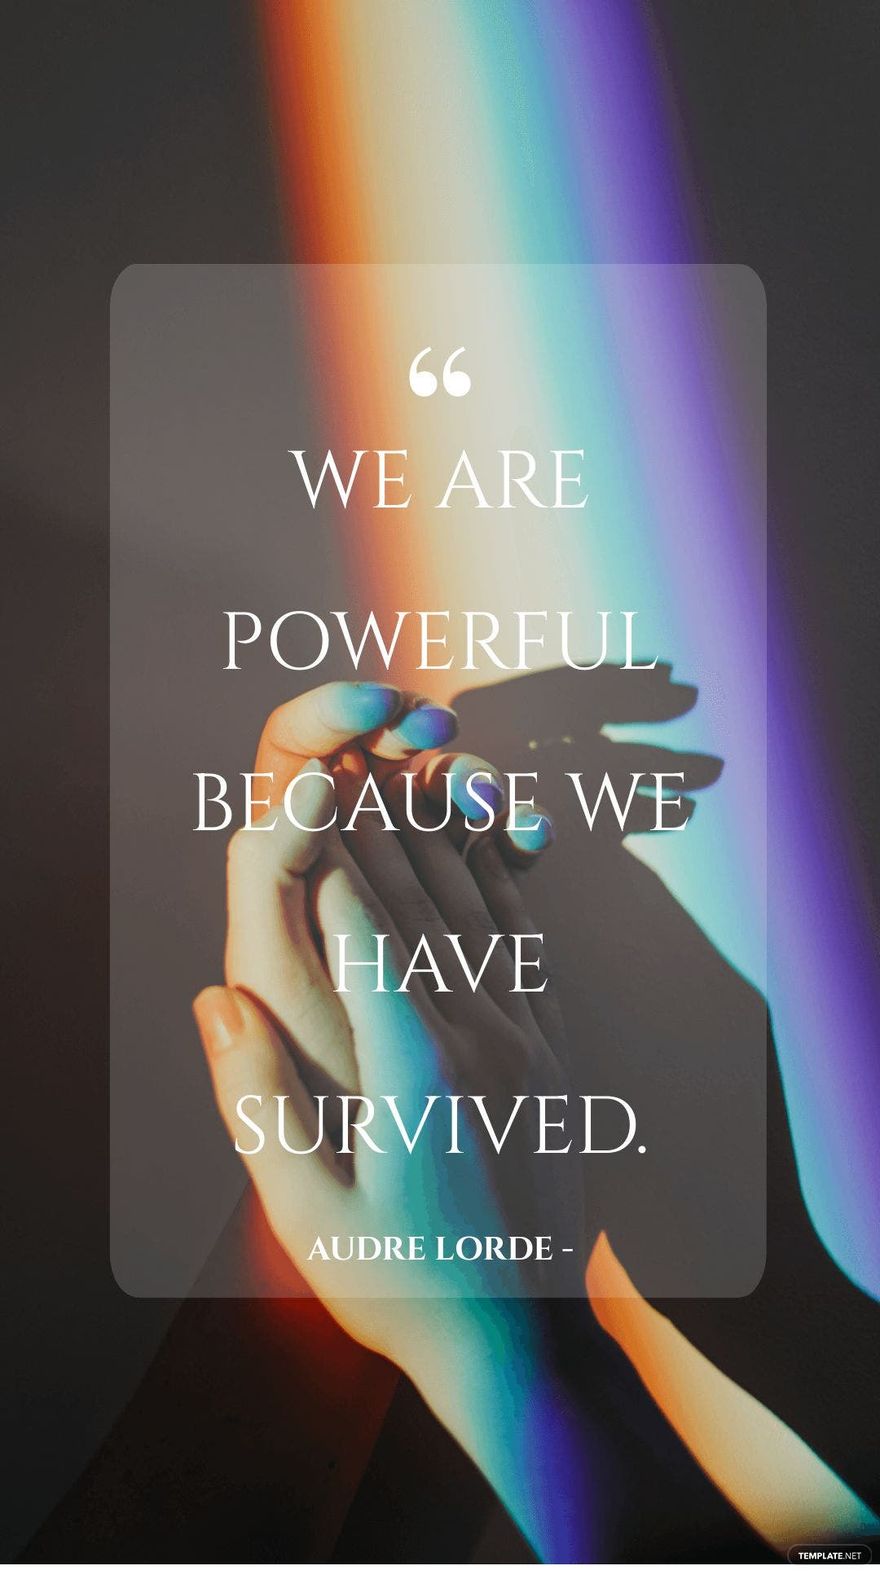 Audre Lorde - We are powerful because we have survived.